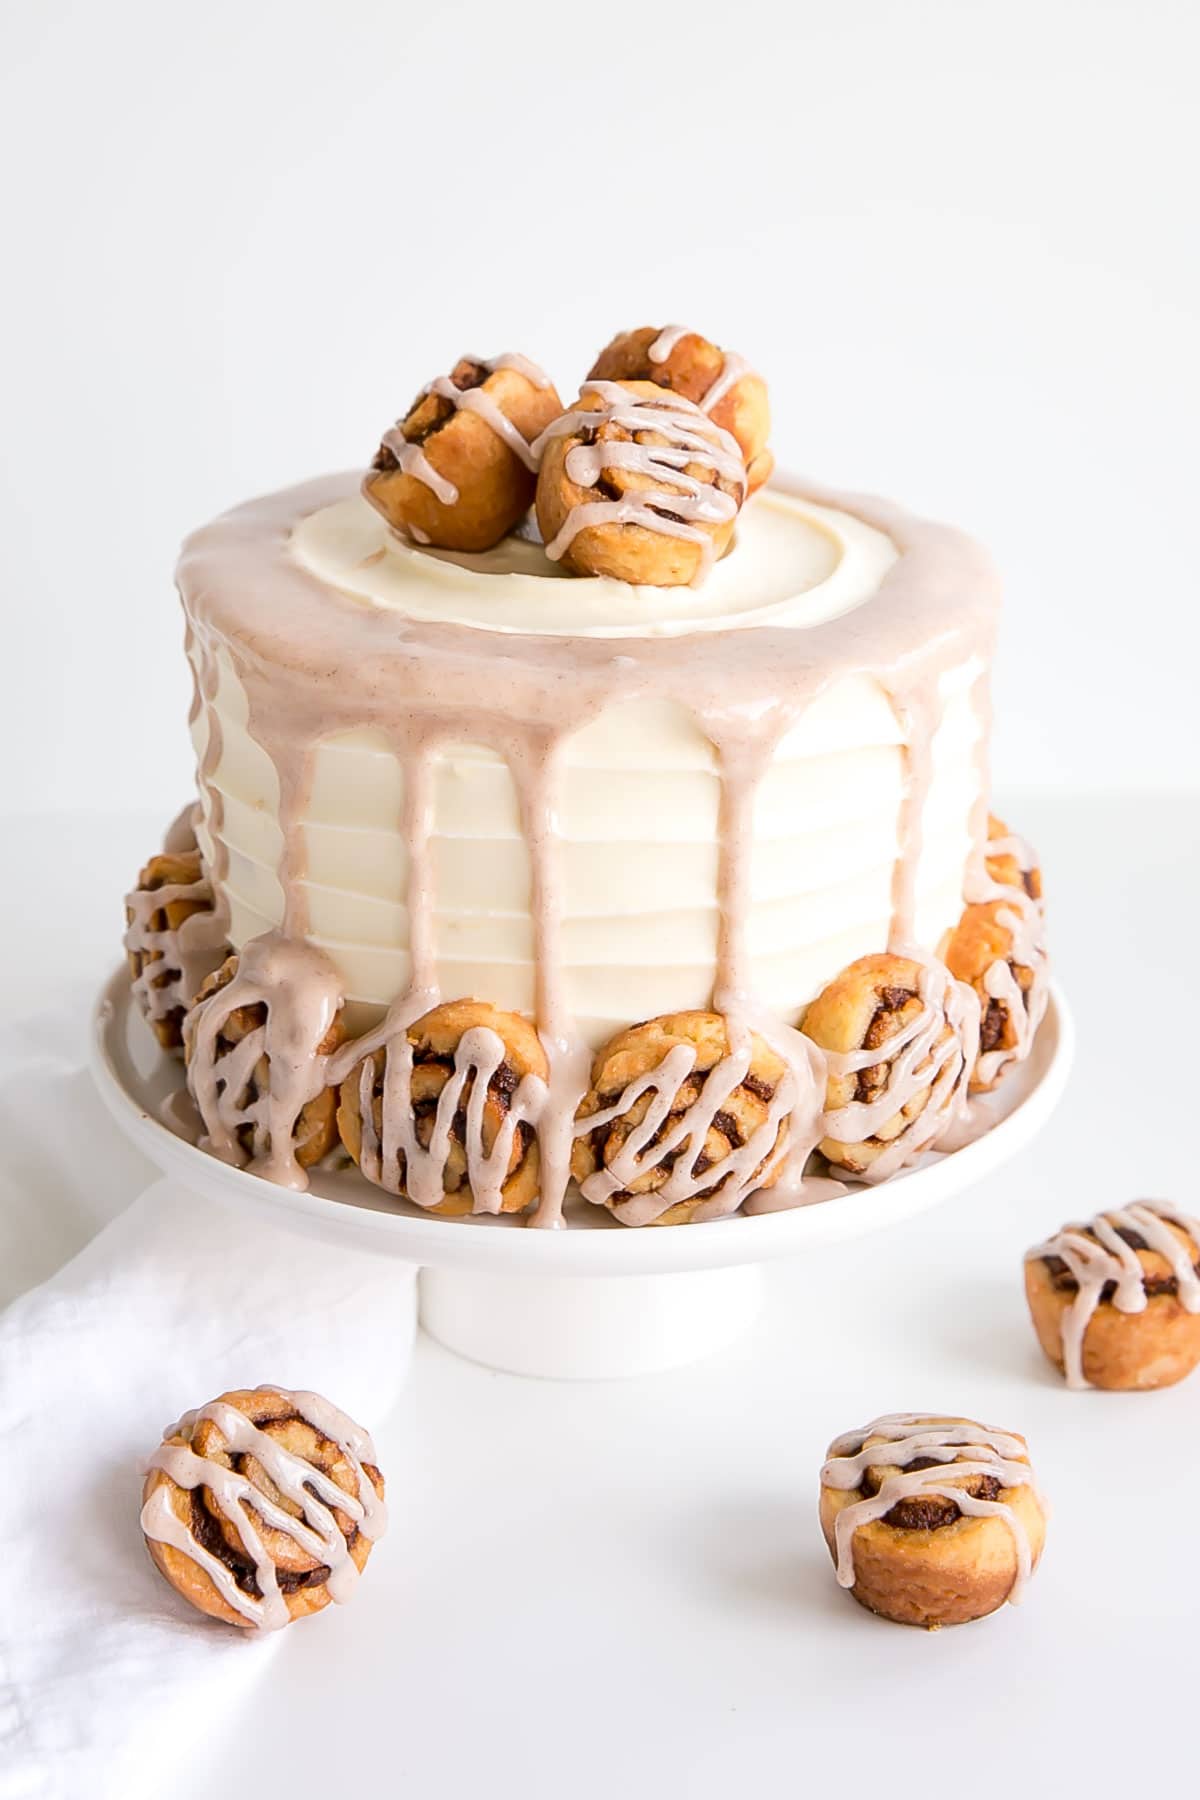 Angled shot of the cake with mini cinnamon rolls on the table.